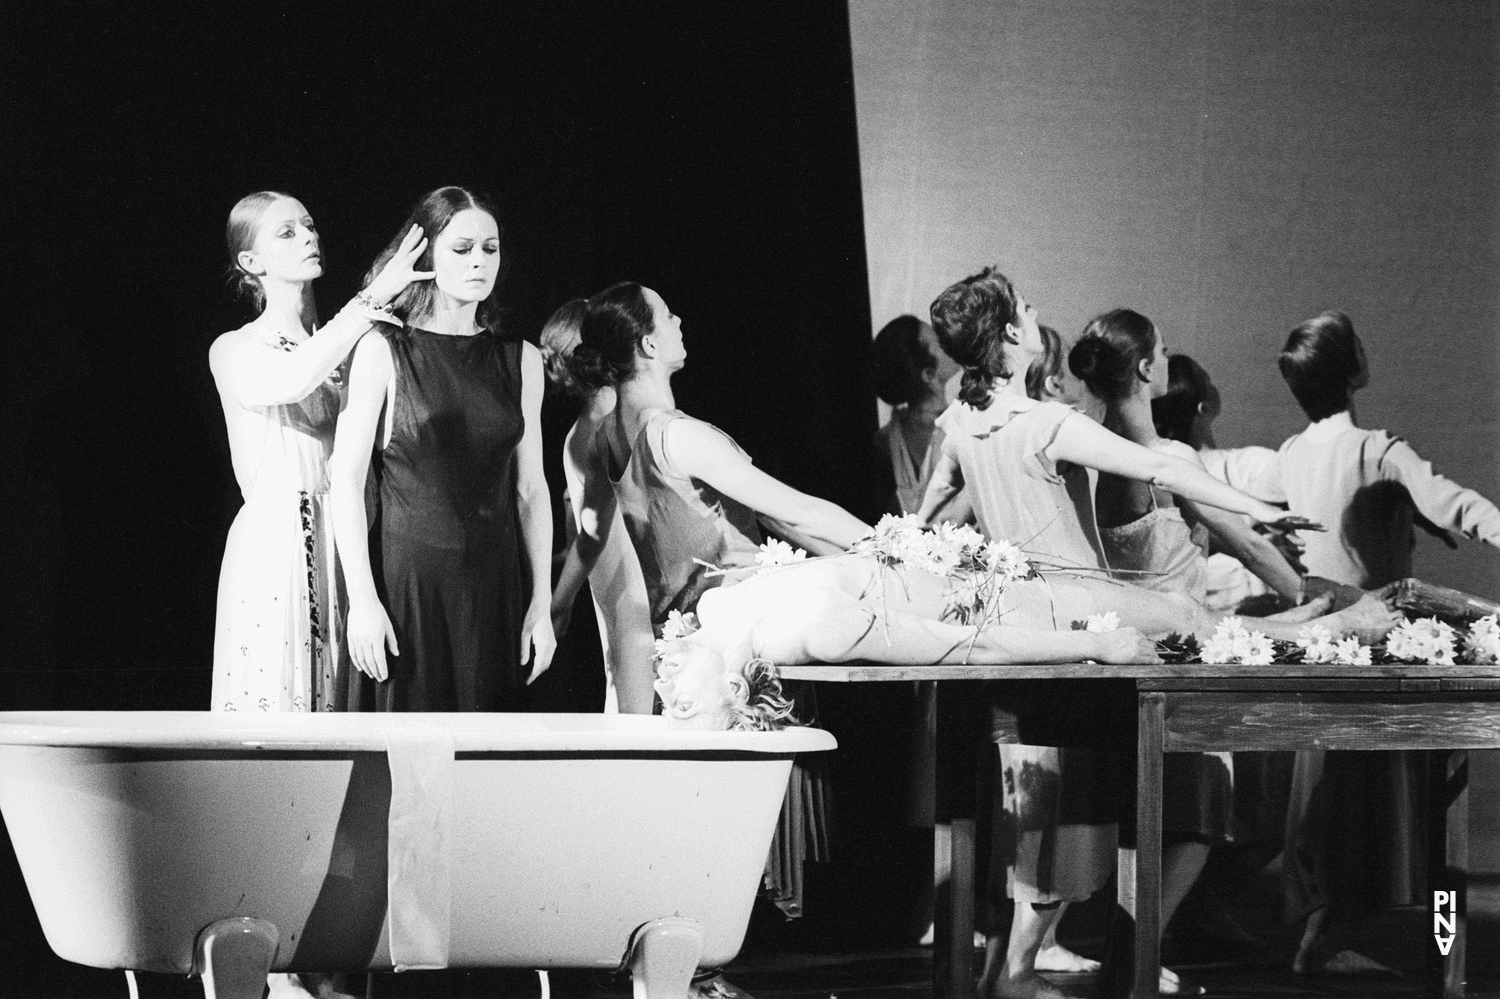 Dominique Mercy, Hiltrud Blanck and Malou Airaudo in “Iphigenie auf Tauris” by Pina Bausch with Tanztheater Wuppertal at Opernhaus Wuppertal (Germany), April 20, 1974